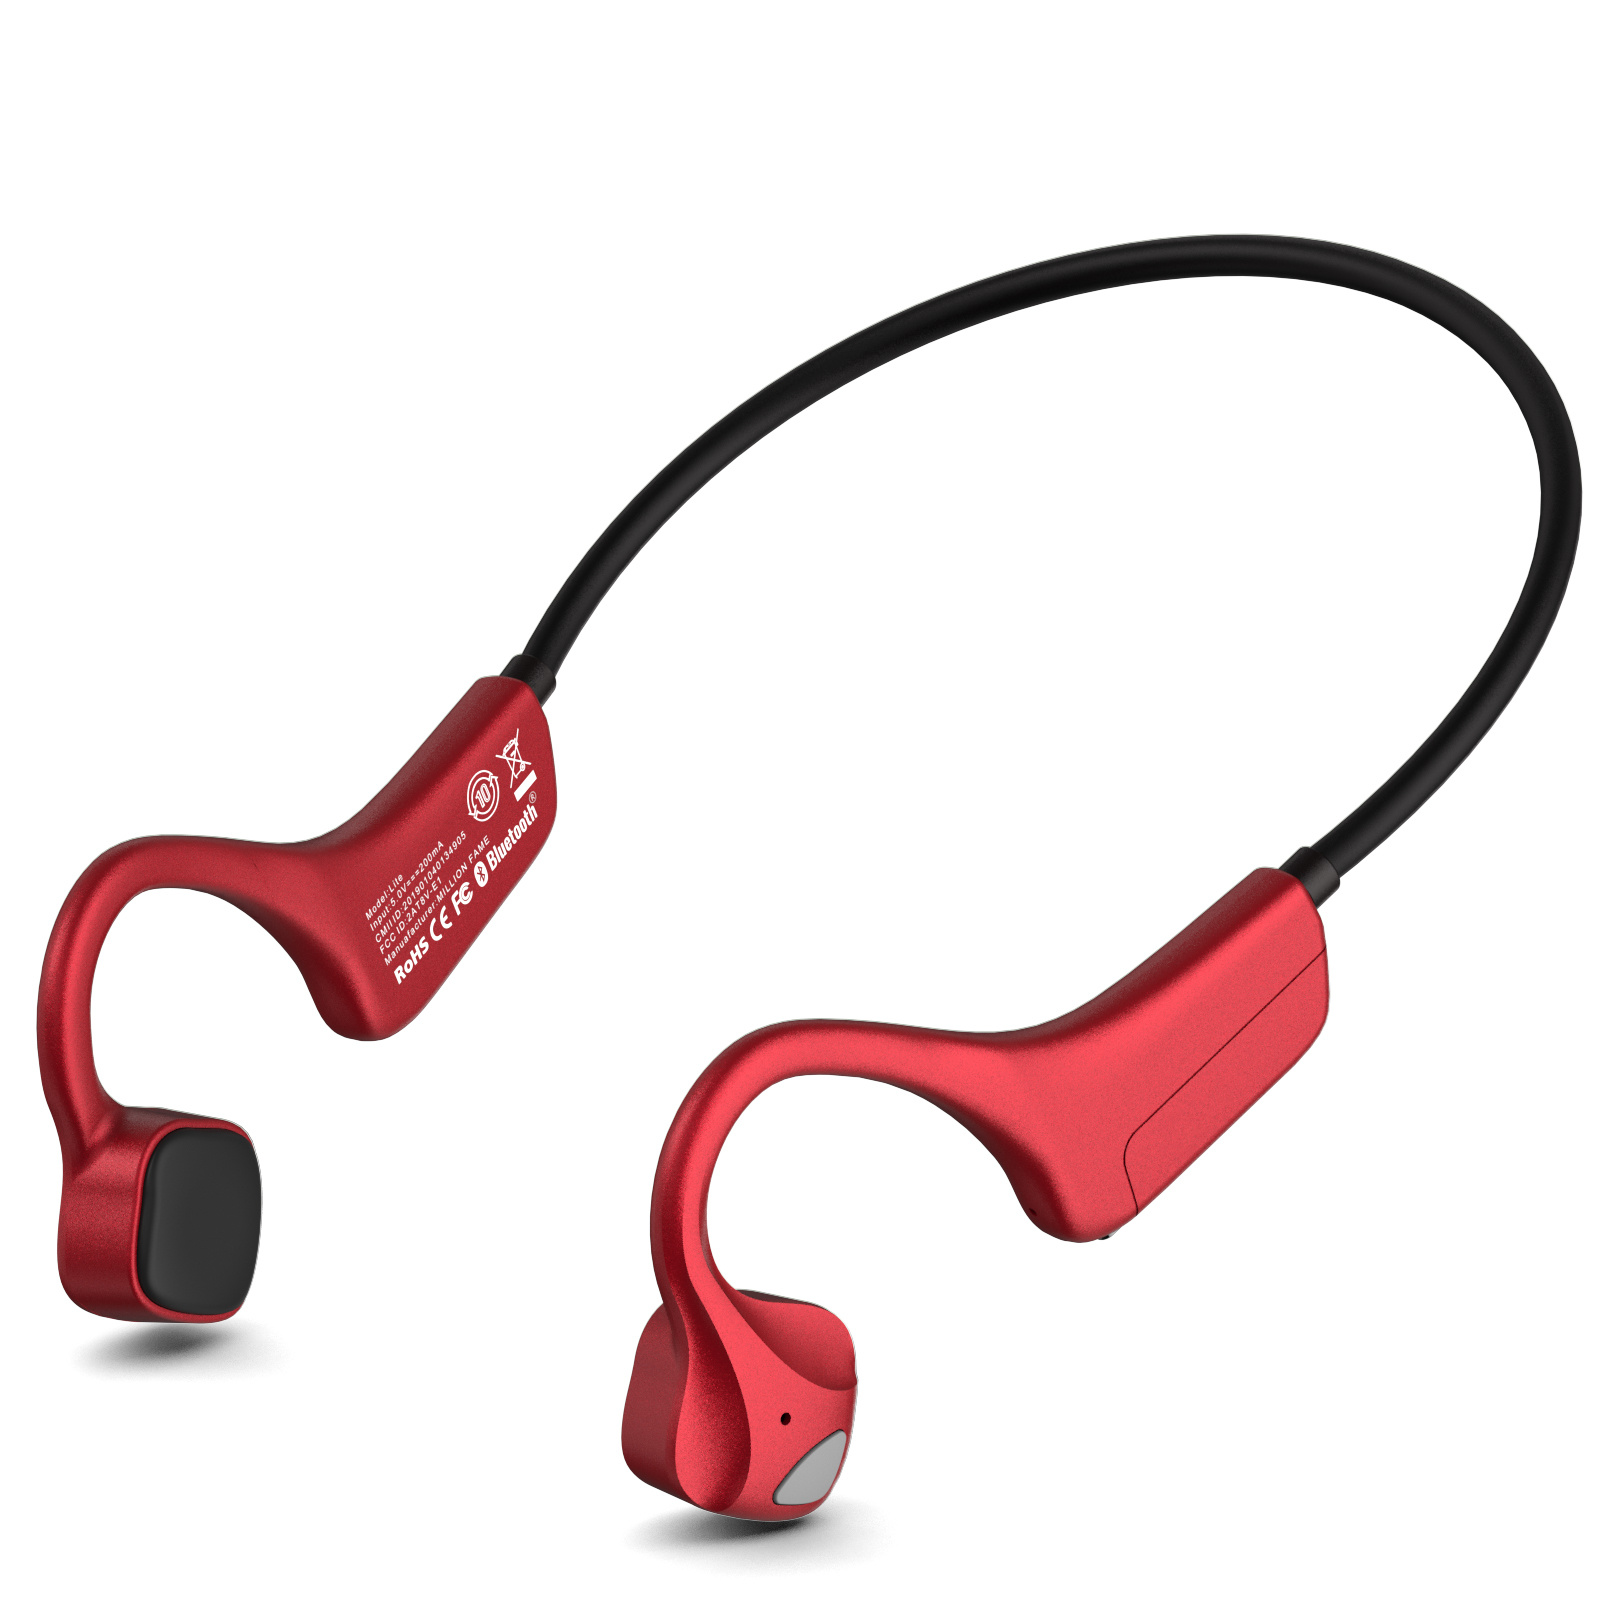 Bone Conduction Headphones with Noise Reduction Tech, 9 Digital N1 Open Ear Headphones with MIC, Waterproof Wireless Bluetooth 5.0 Sport Headset for Running, Bicycling, Hiking, Yoga -Red